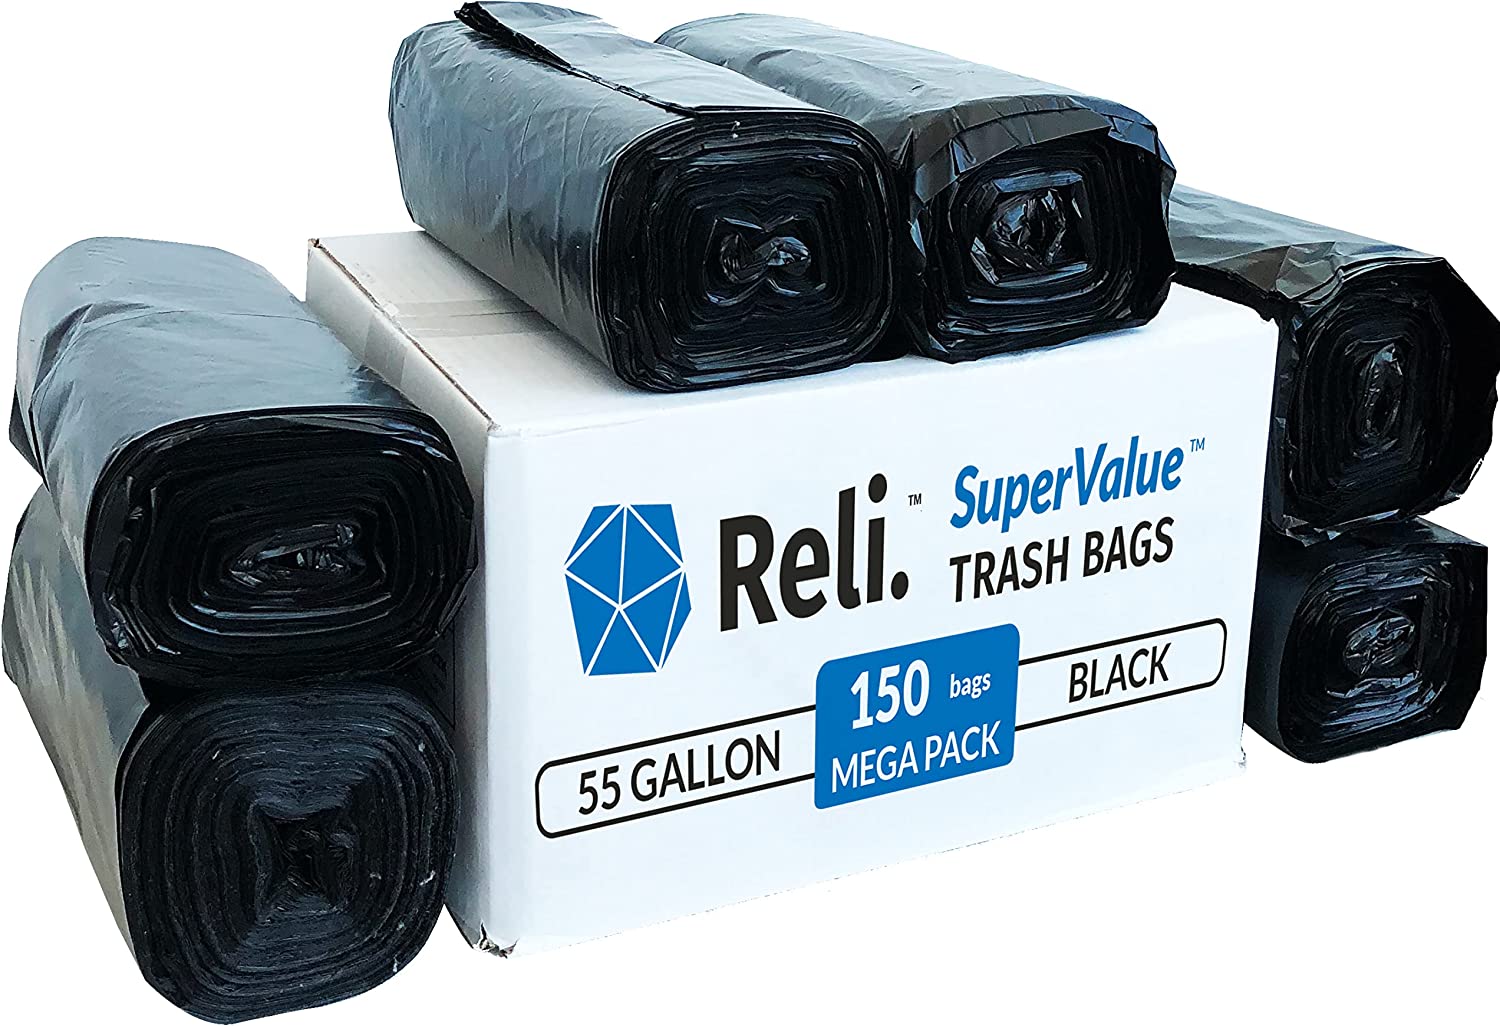 https://discounttoday.net/wp-content/uploads/2022/11/Reli.-Easy-Grab-Trash-Bags-55-60-Gallon-150-Count-Made-in-USA-Star-Seal-Super-High-Density-Rolls-Heavy-Duty-Can-Liners-Garbage-Bags-Bulk-Contractor-Bags-50-55-60-Gallon-Capacity-Black-2.jpg